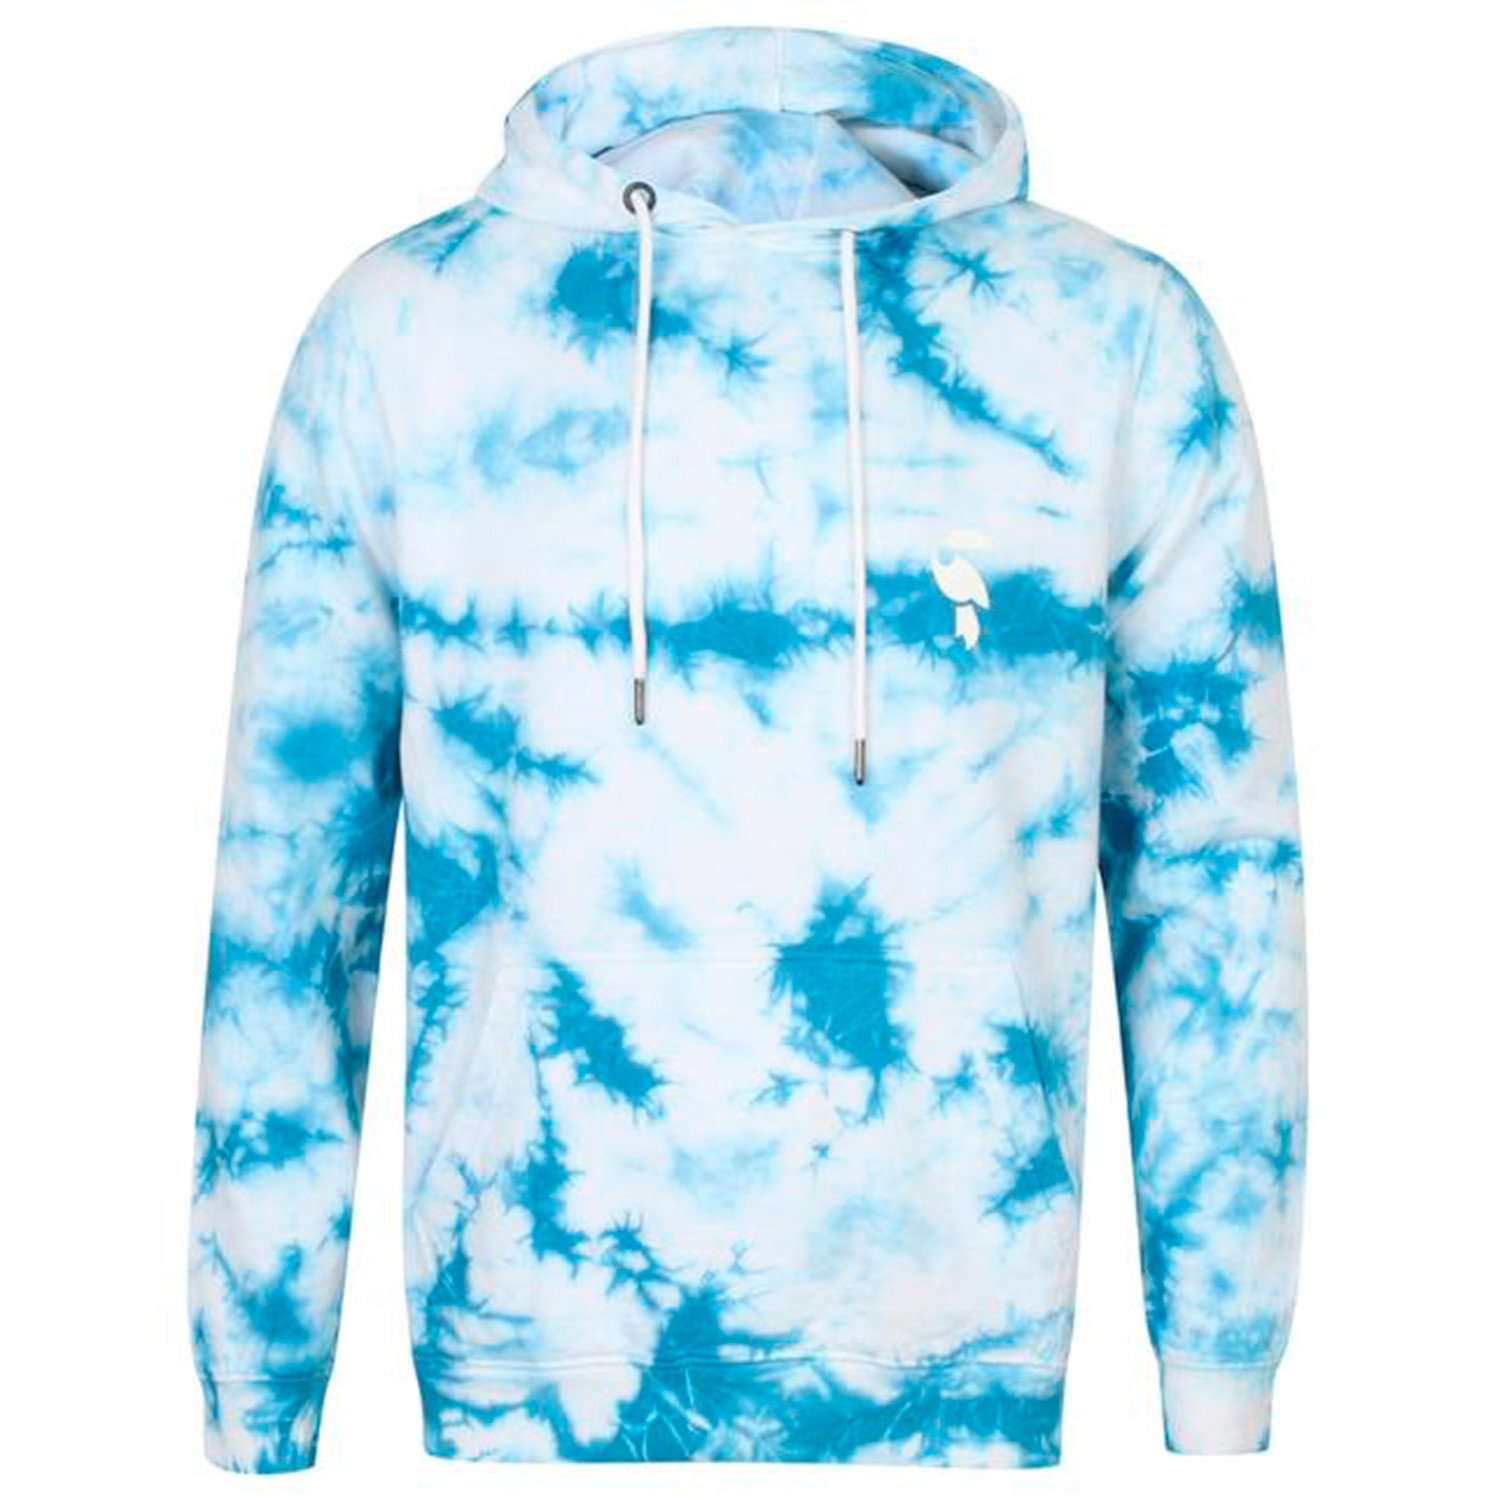 Bento Tie Dye Hoodie // Blue And White (XS) - Independent Leaders ...